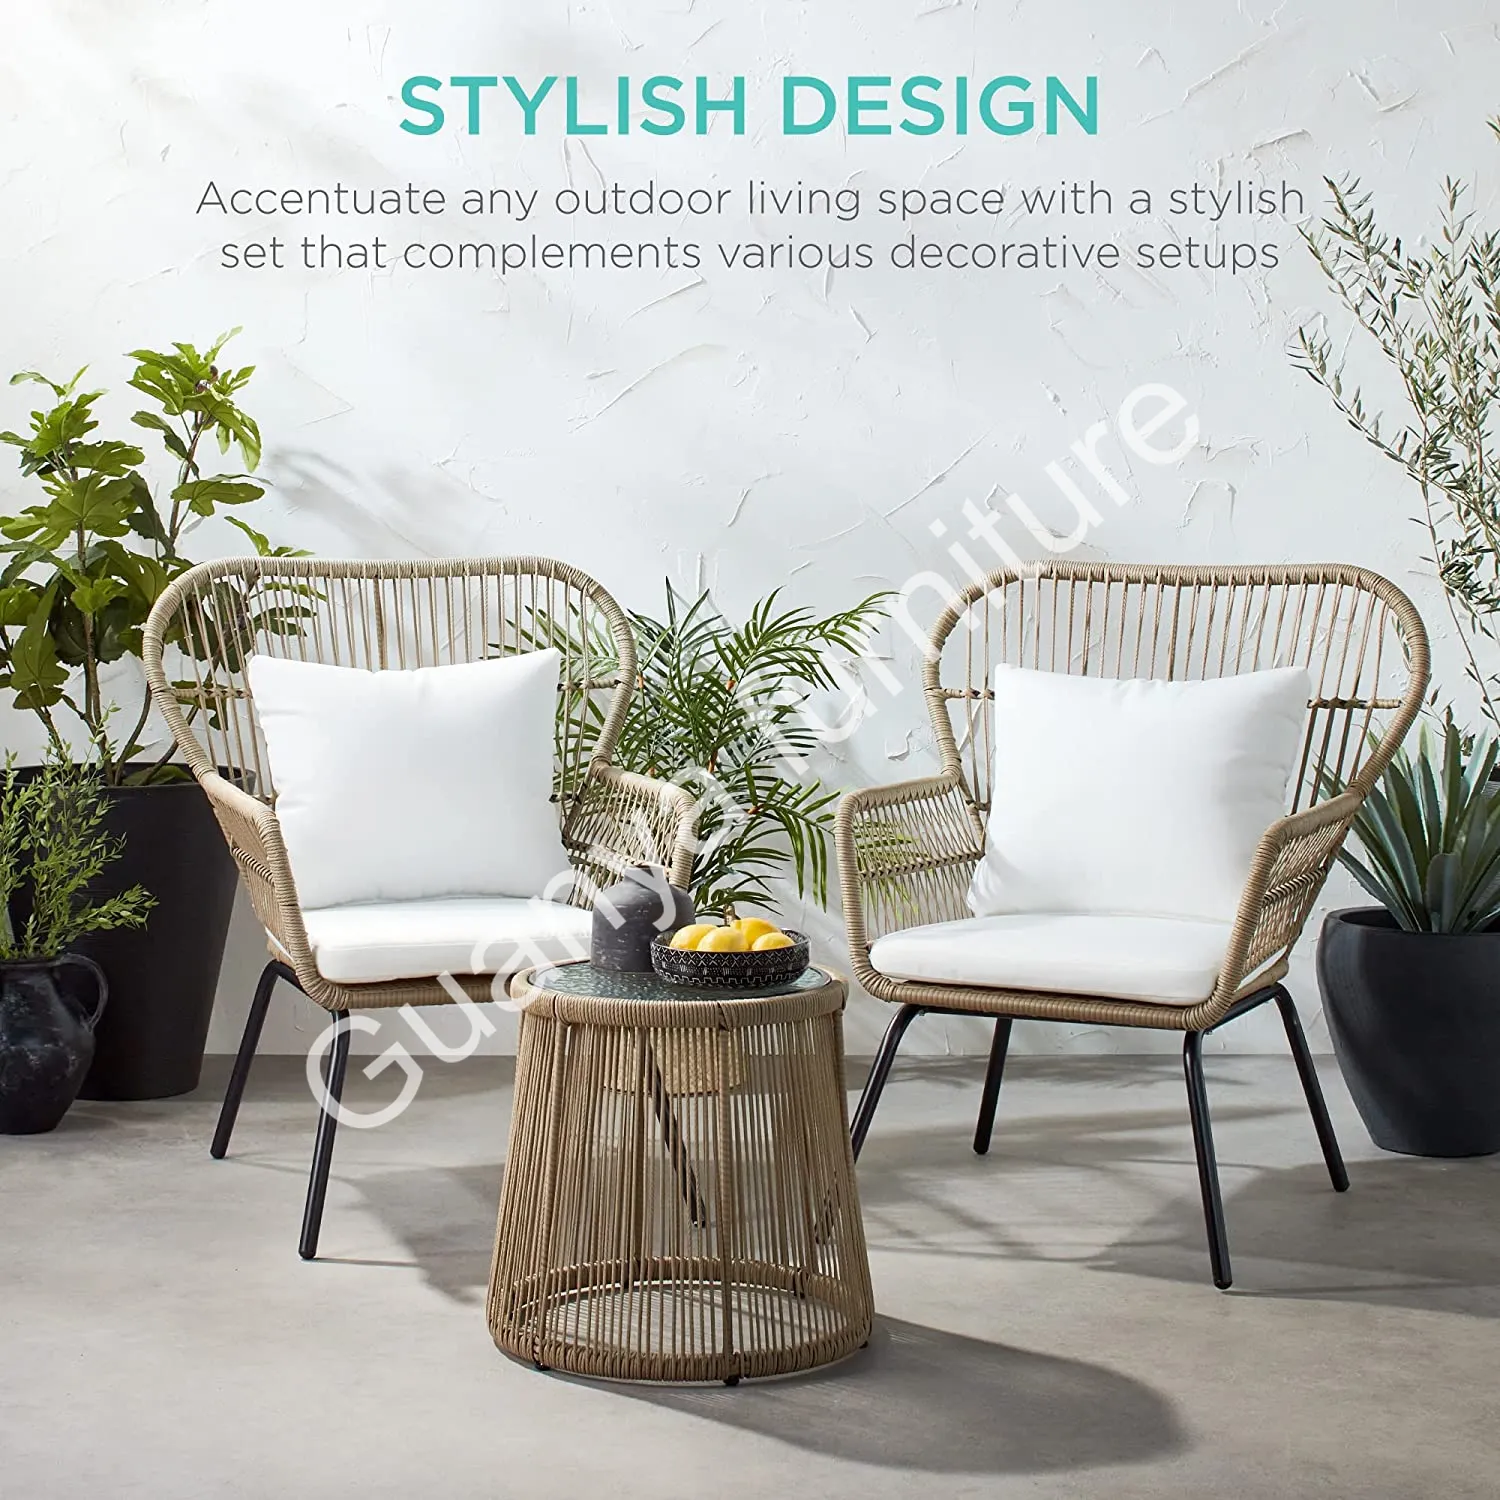 Luxury Modern Outdoor Patio Furniture Set All-Weather Wicker Furniture for Porch, Backyard Metal Outdoor Cafe Ergonomic Chairs